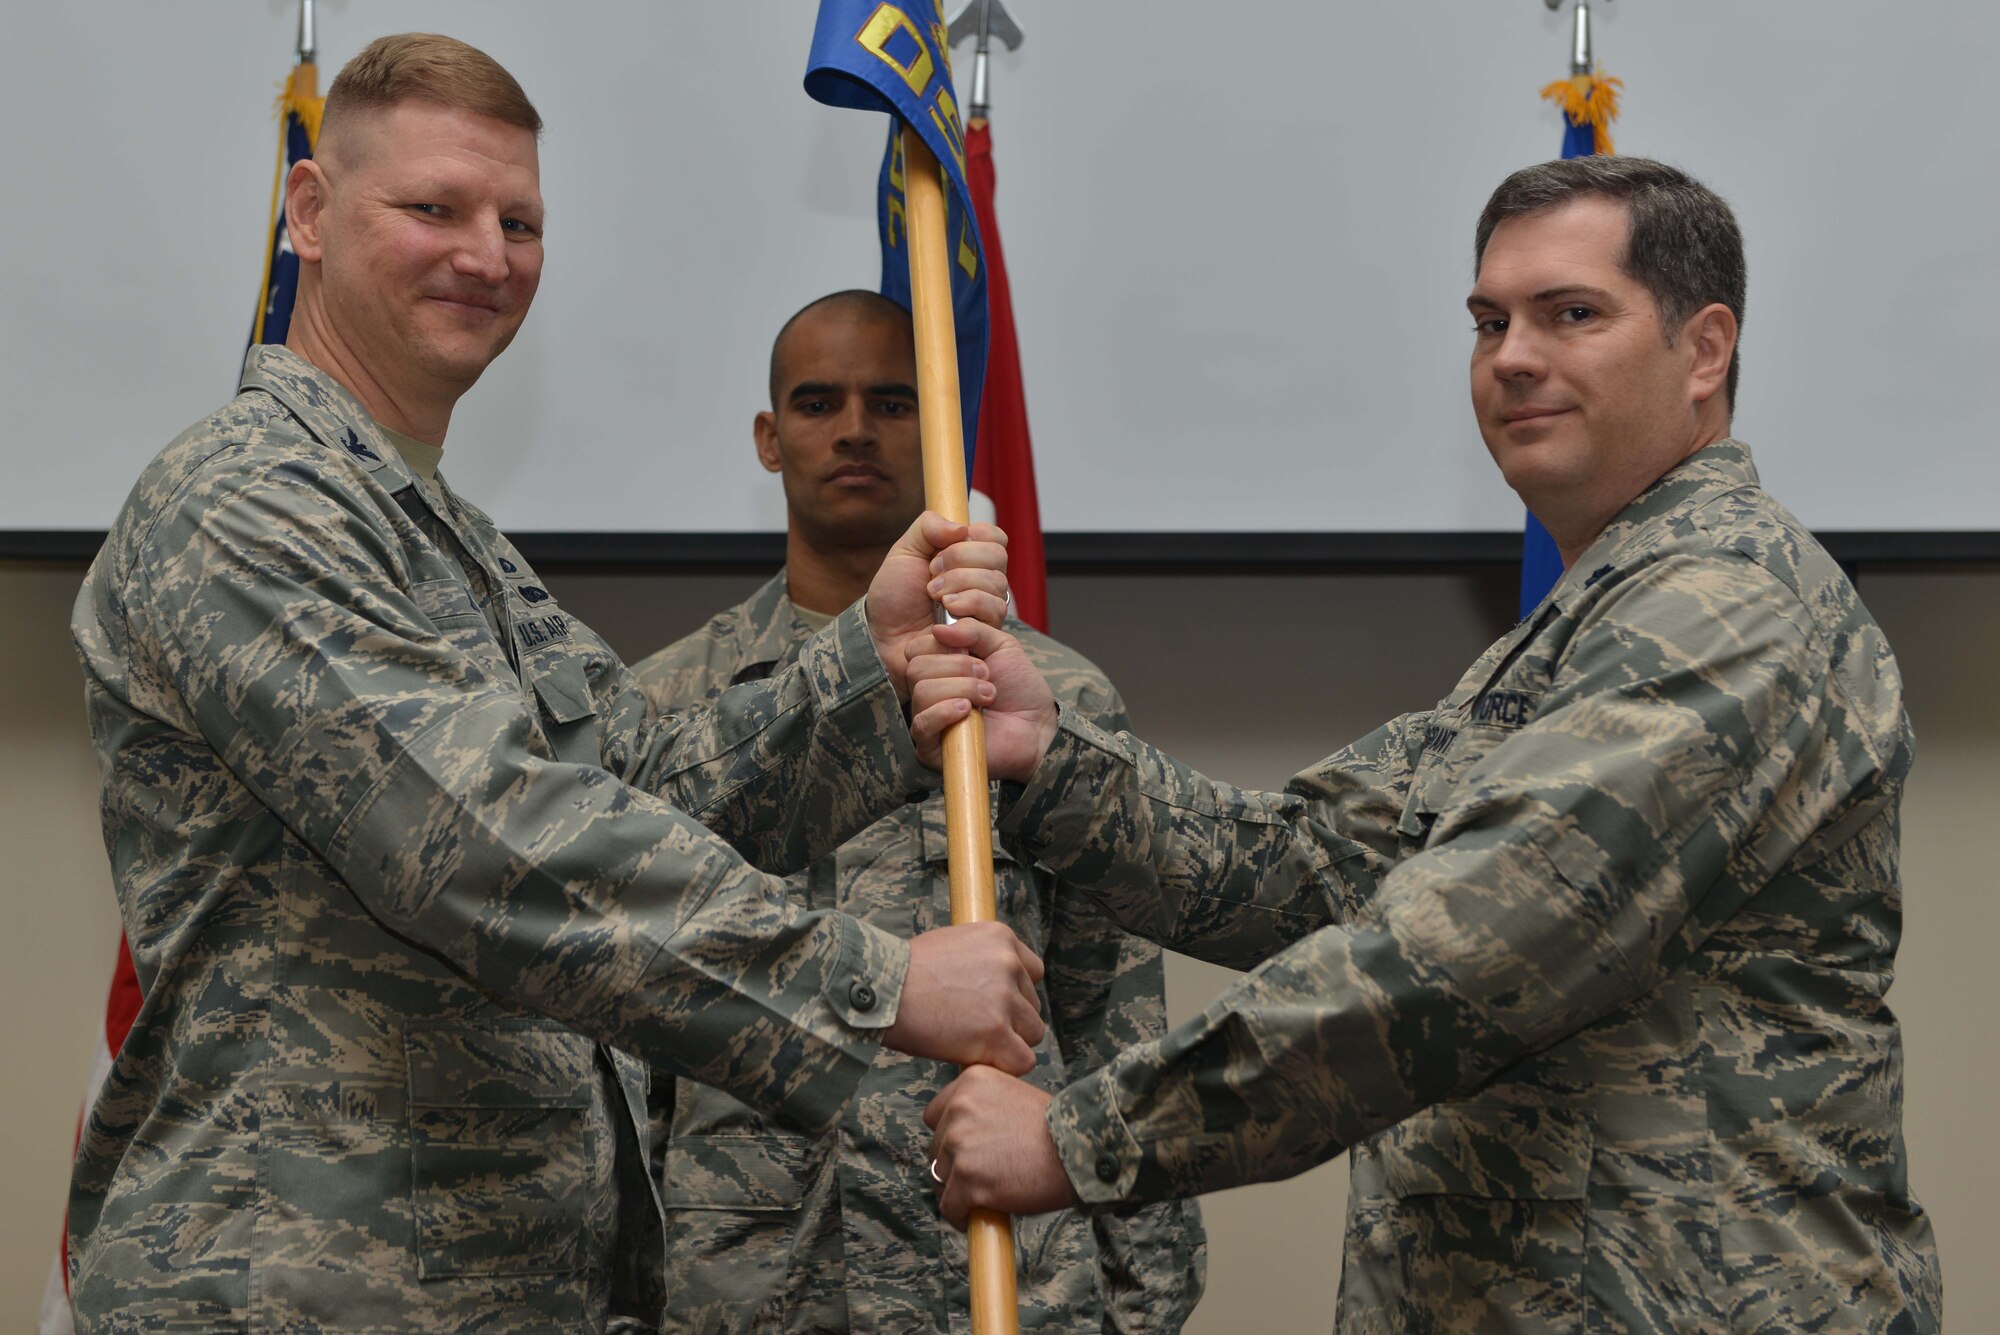 U.S. Air Force Lt. Col. Robert Grant, 39th Operations Support Squadron incoming commander, receives command from U.S. Air Force Col. James Zirkel, 39th Weapons System Security Group commander, during a change of command ceremony June 16, 2016, at Incirlik Air Base, Turkey. Prior to taking command, Grant served as the chief of the commander’s action group, 3rd Air Force and 17th Expeditionary Air Force, Ramstein Air Base, Germany. (U.S. Air Force photo by Senior Airman John Nieves Camacho/Released)